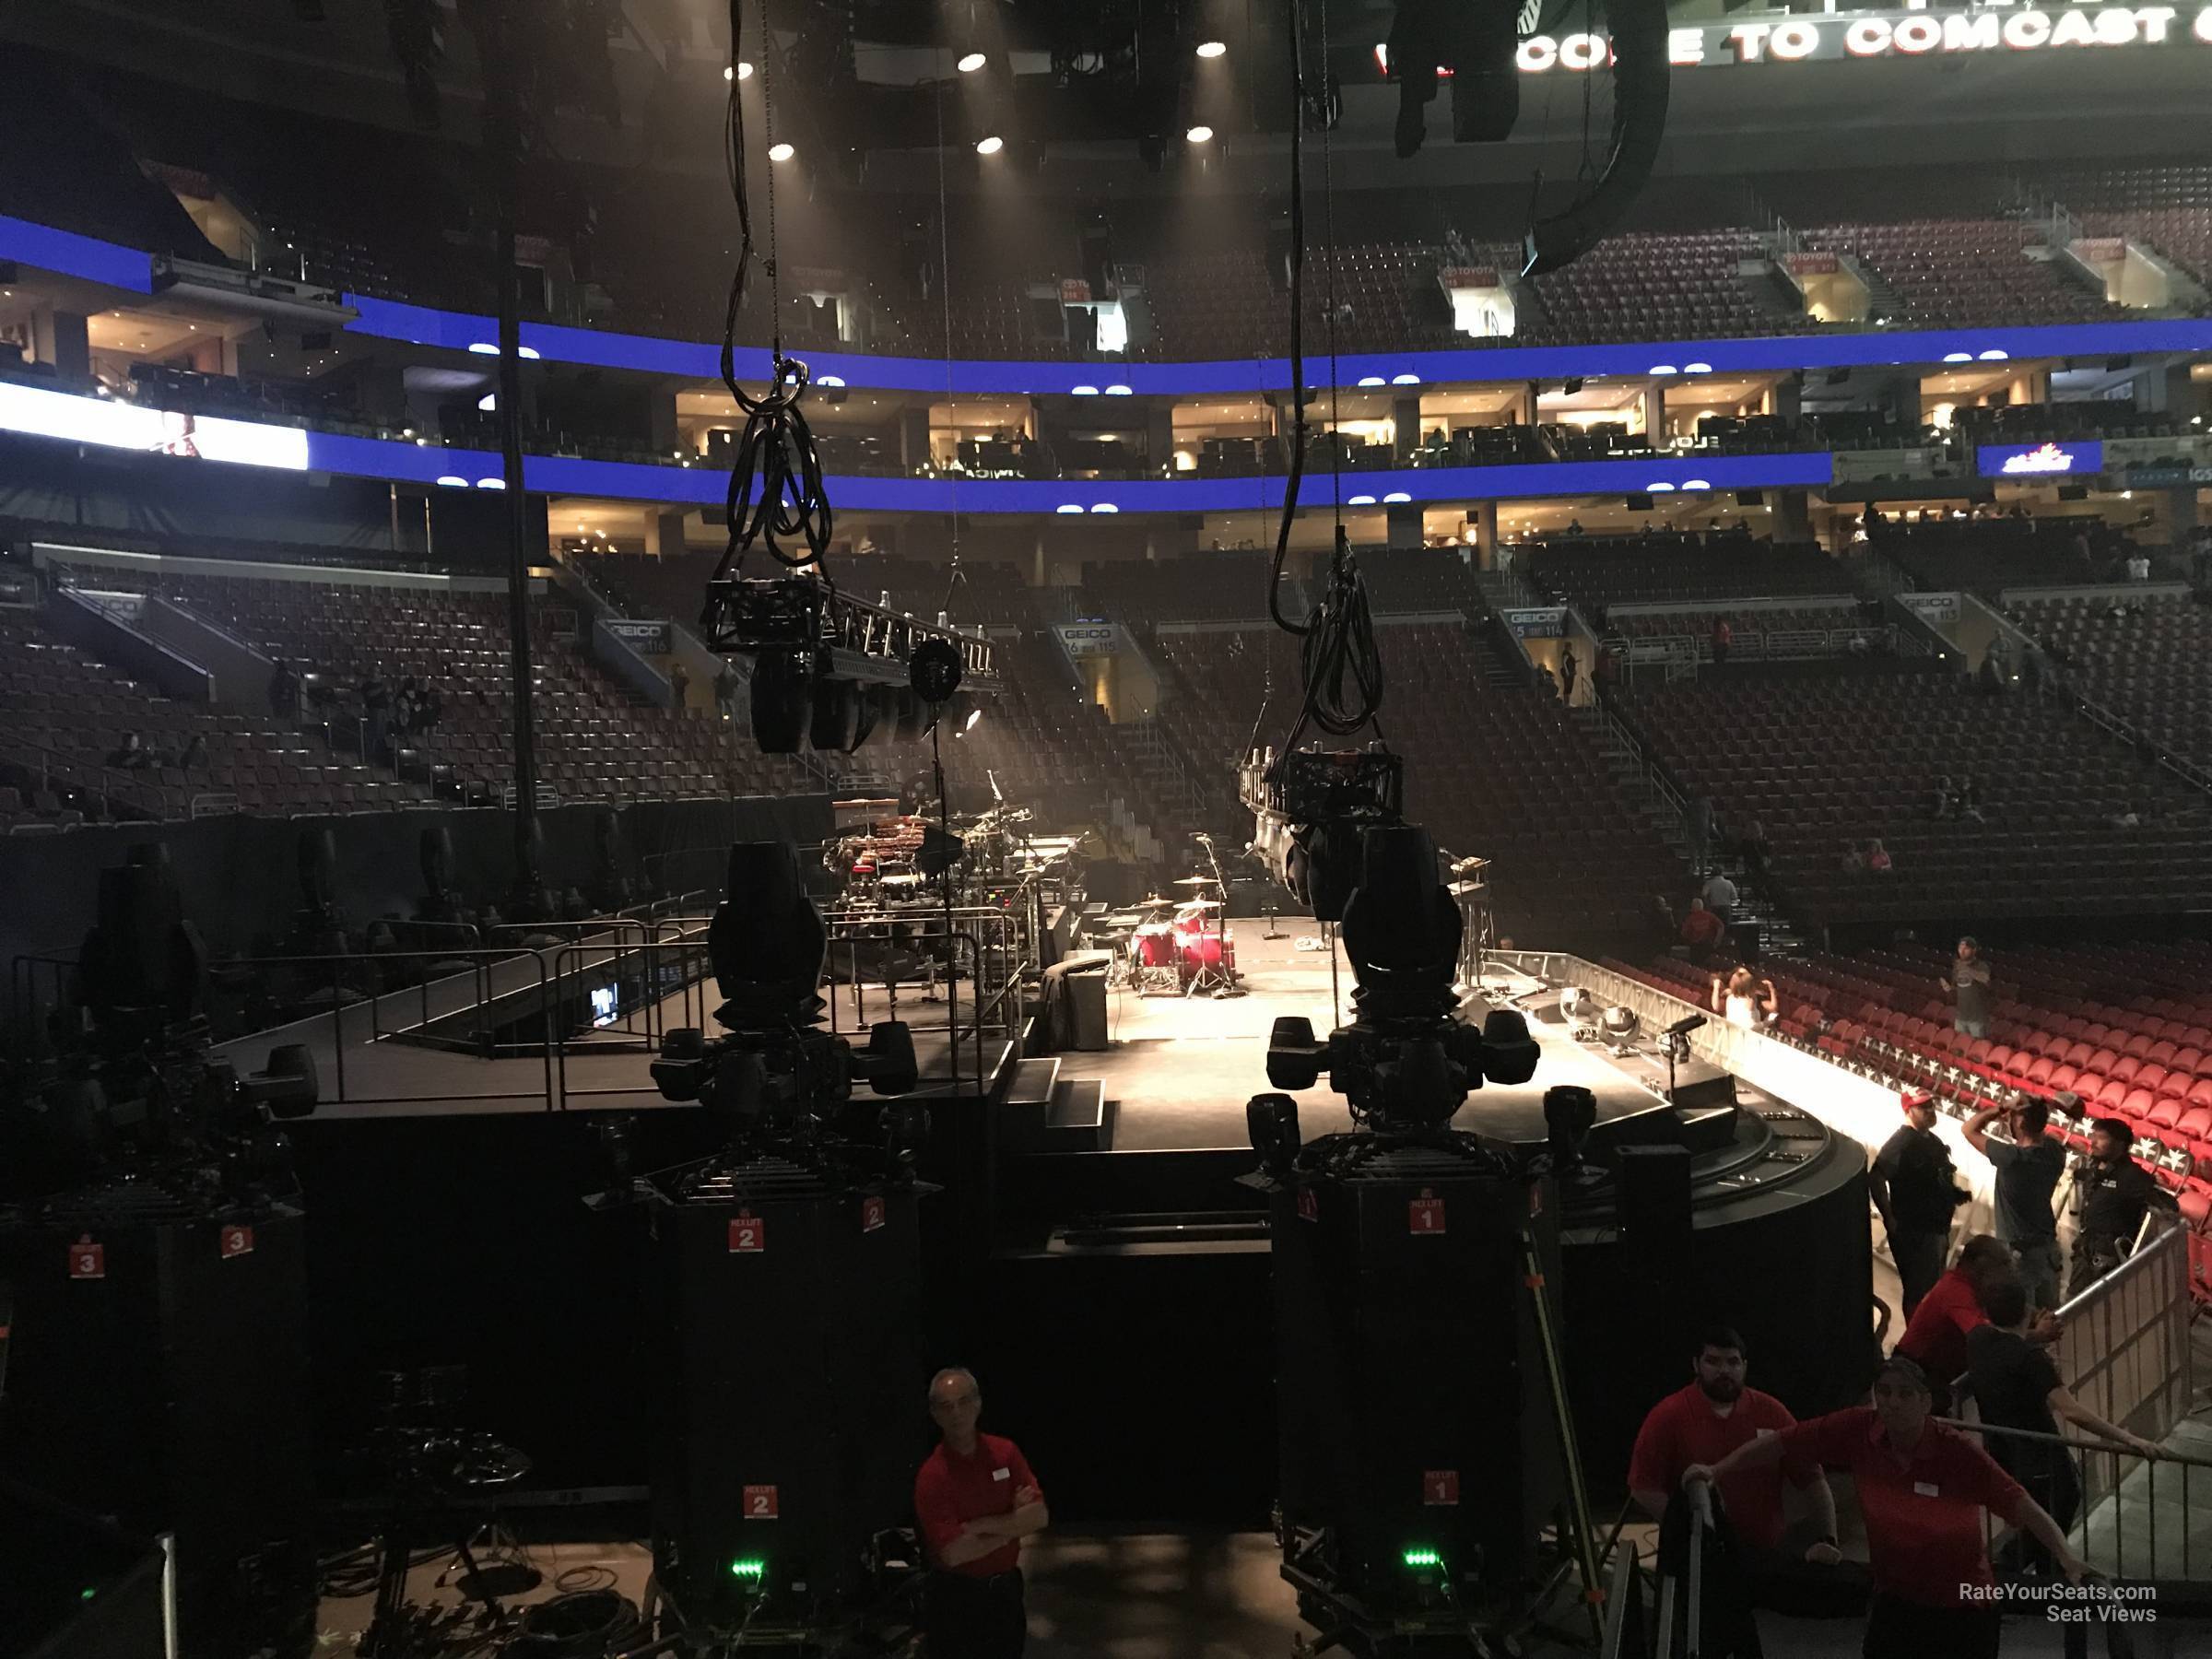 section 122, row 8 seat view  for concert - wells fargo center